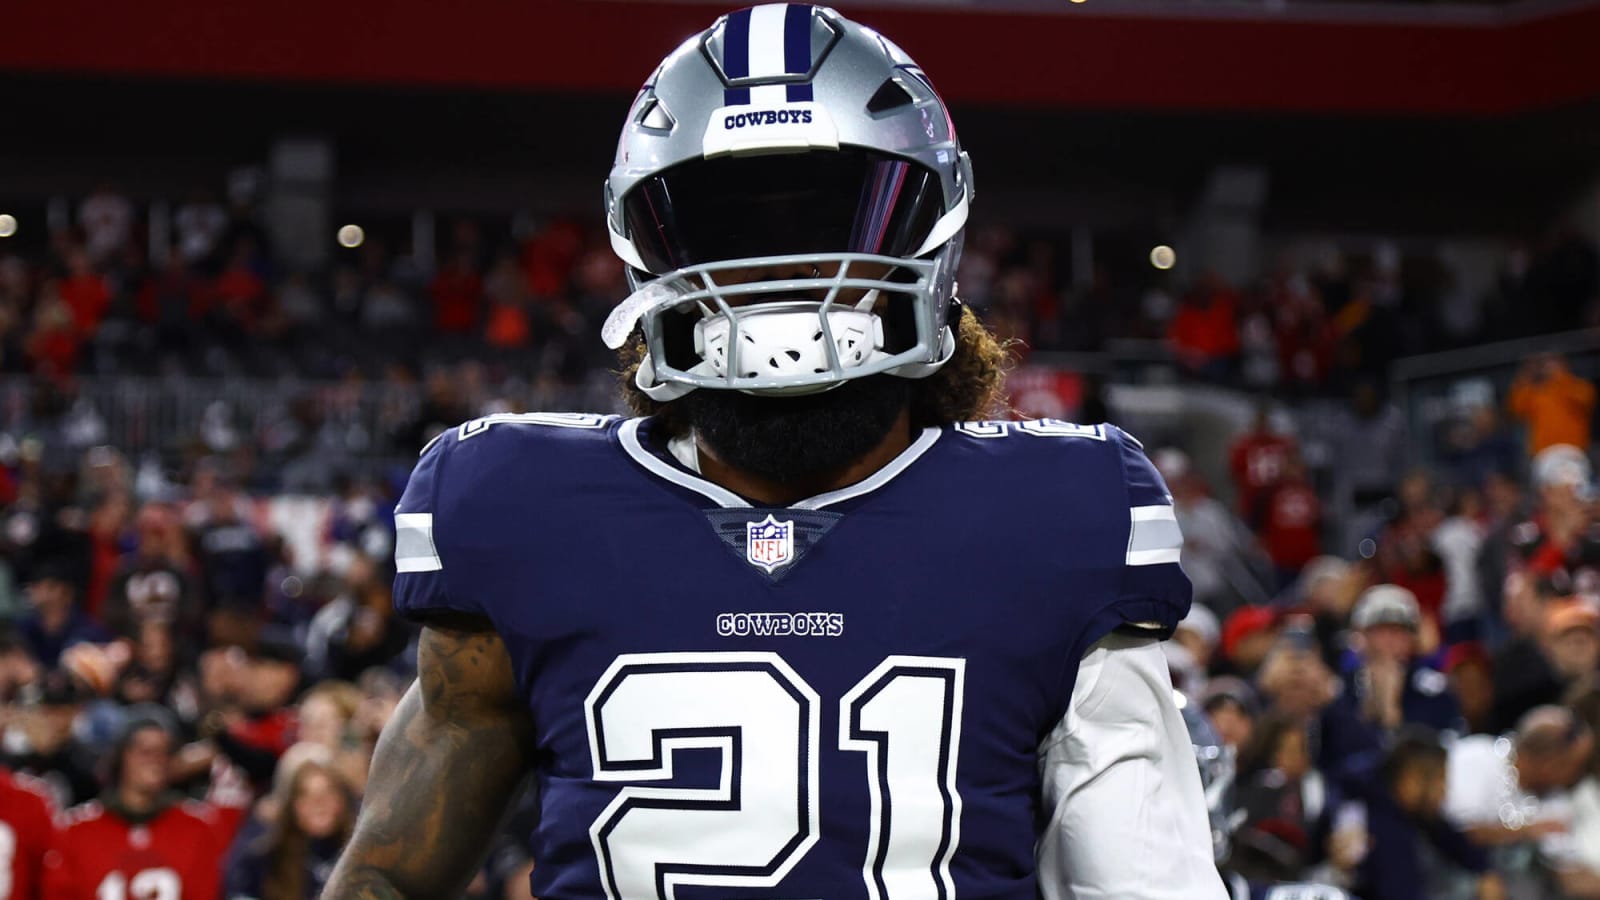 End of an era: Cowboys release two-time rushing champ Elliott